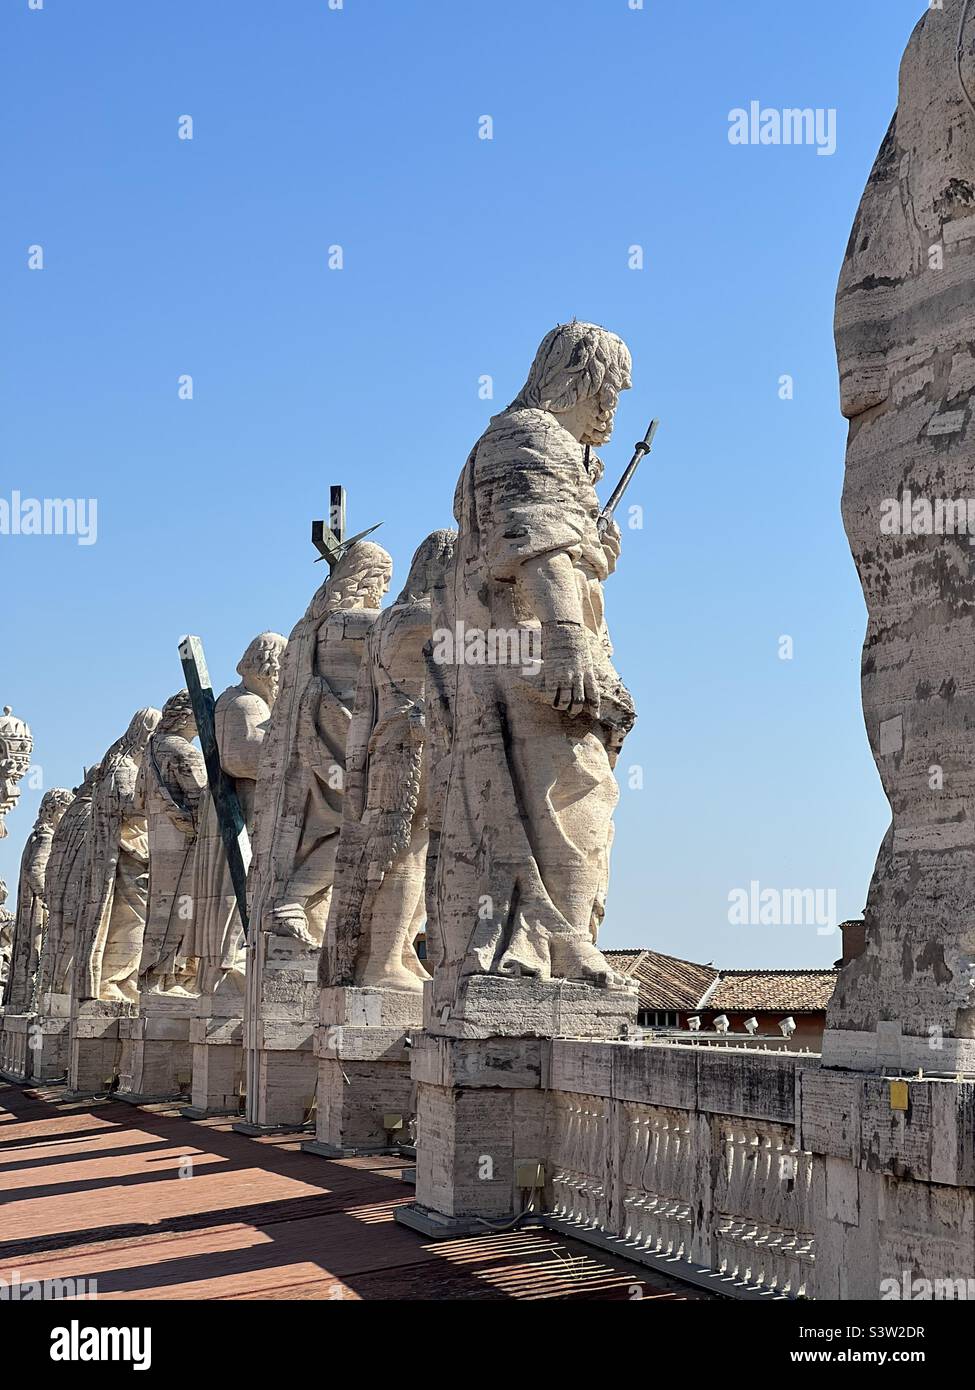 Statues on the roof, St. Peter’s Basilica, Vatican statues, Italy travel photo, Vatican travel photo, Jesus Christ statue, Apostoles, St. Peter’s Square, St. Peter’s Cathedral Stock Photo